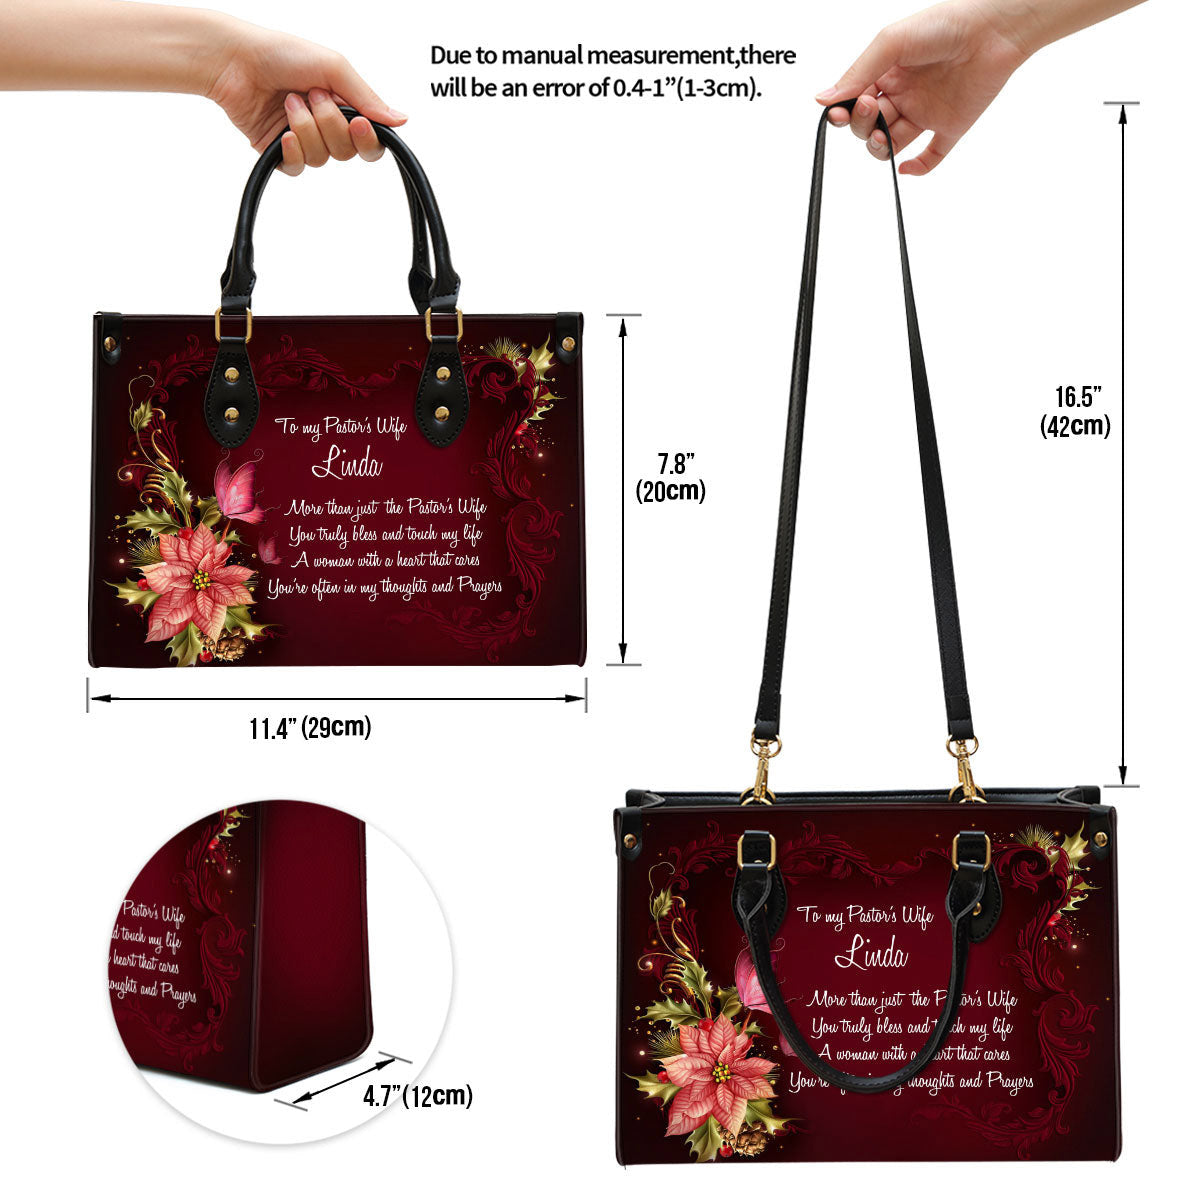 More Than Just The Pastor's Wife Flower And Butterfly Personalized Leather Handbag With Handle